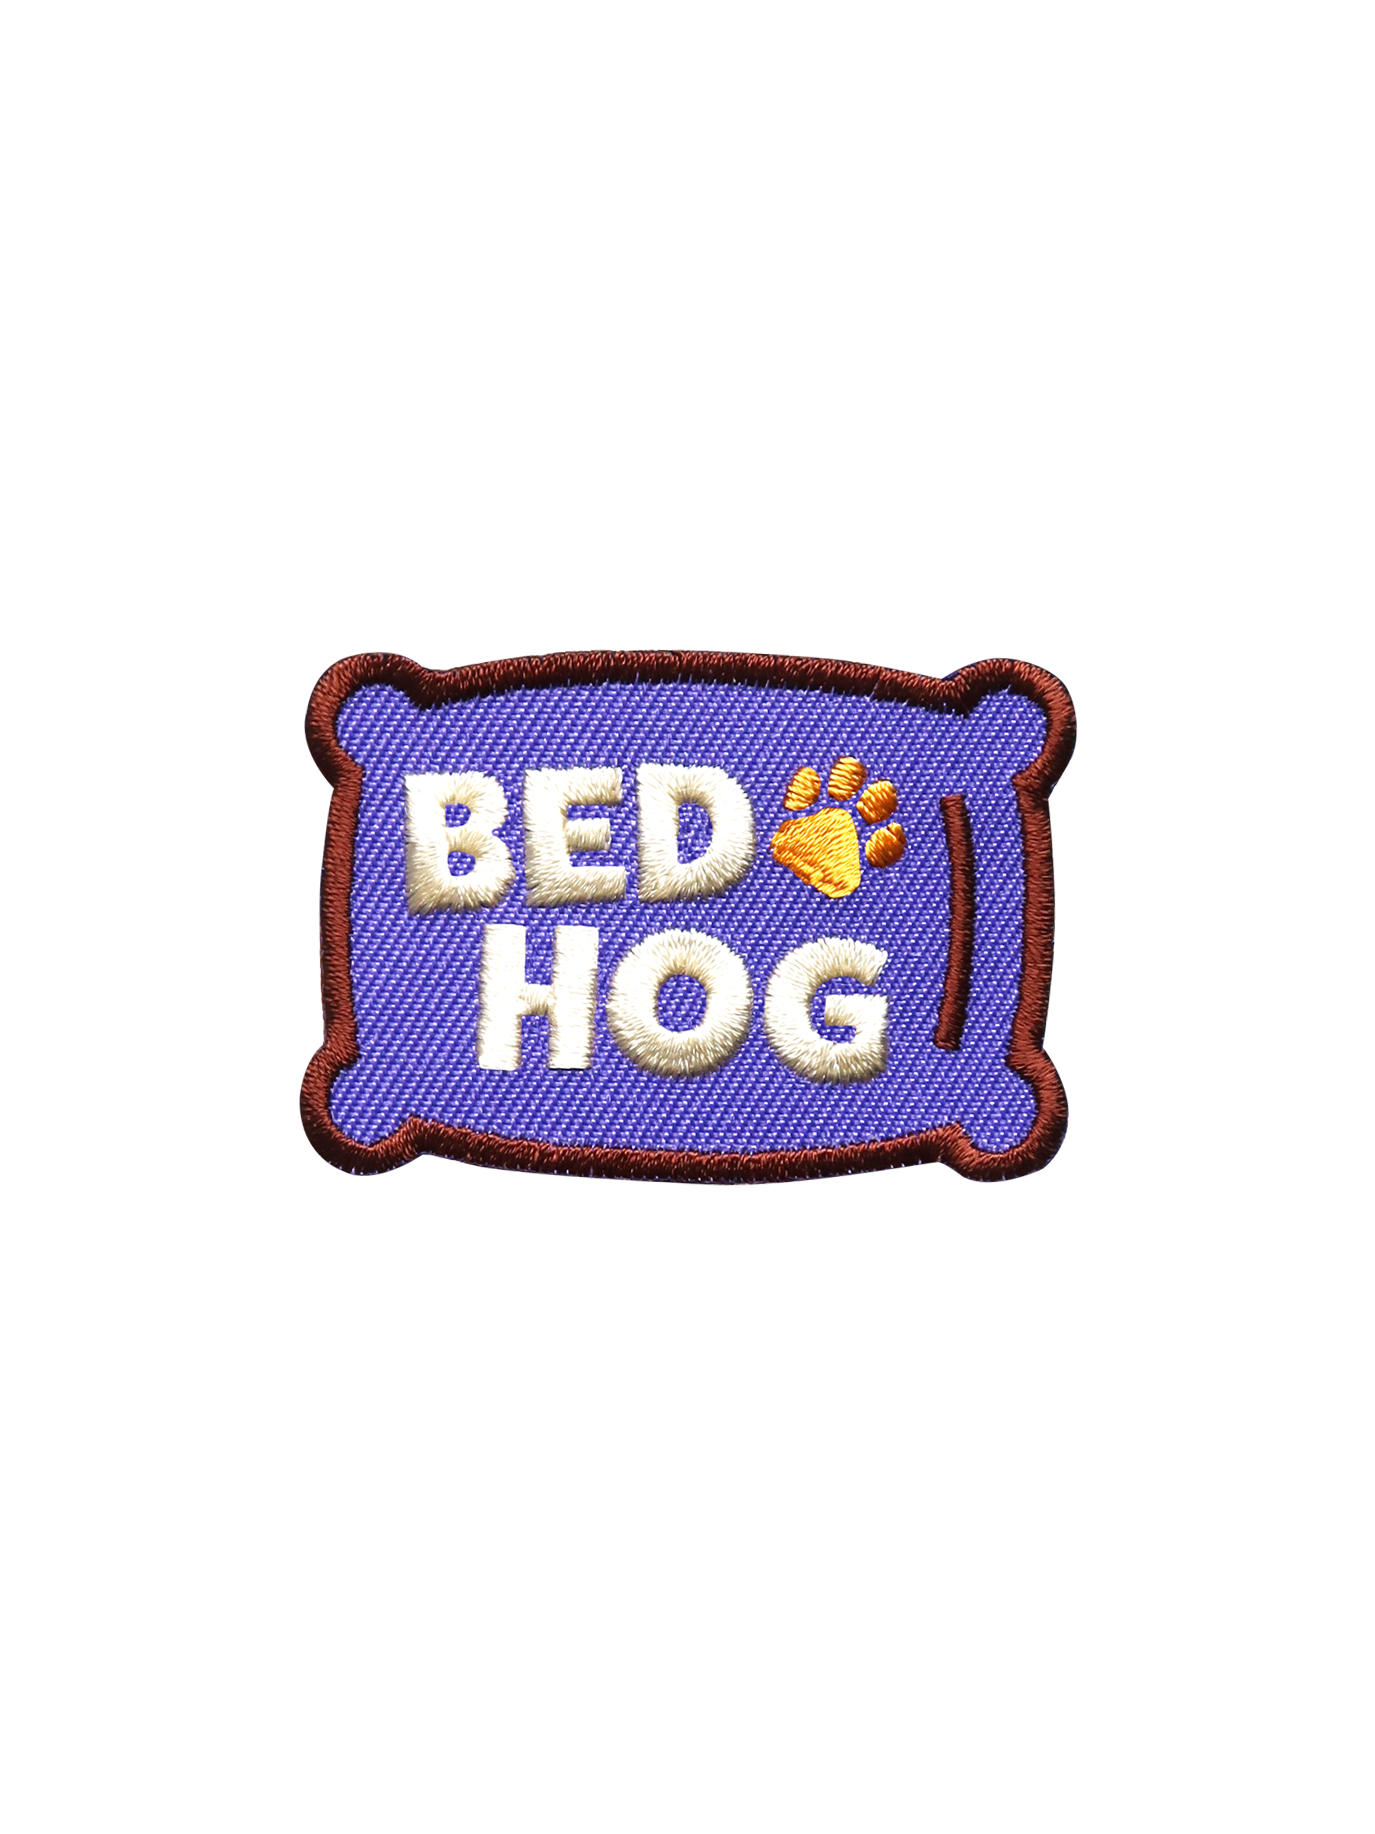 Scout's Honour - Bed Hog iron-on patch for dogs